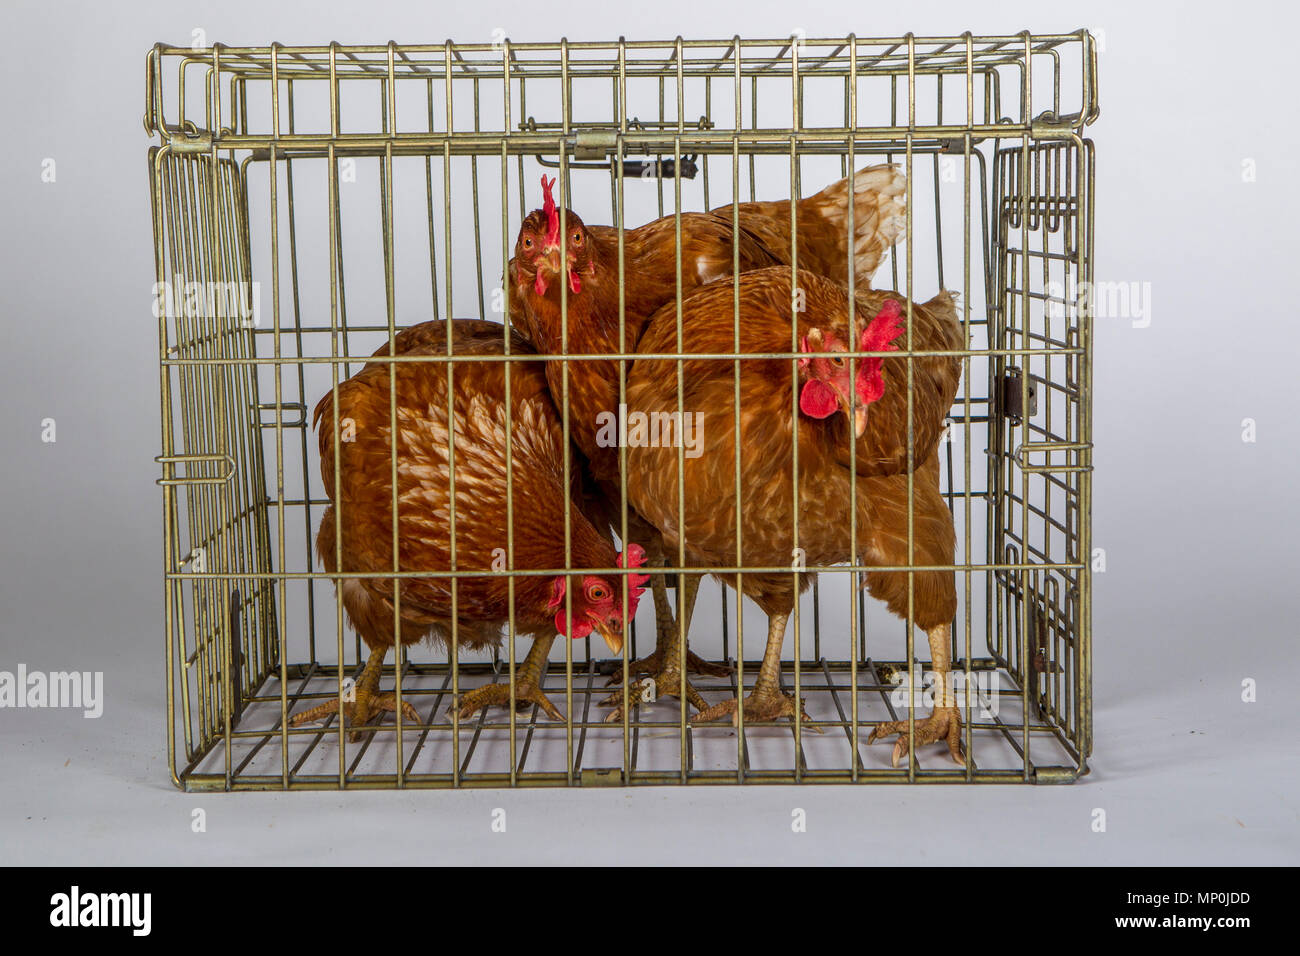 Chickens in a cage Stock Photo